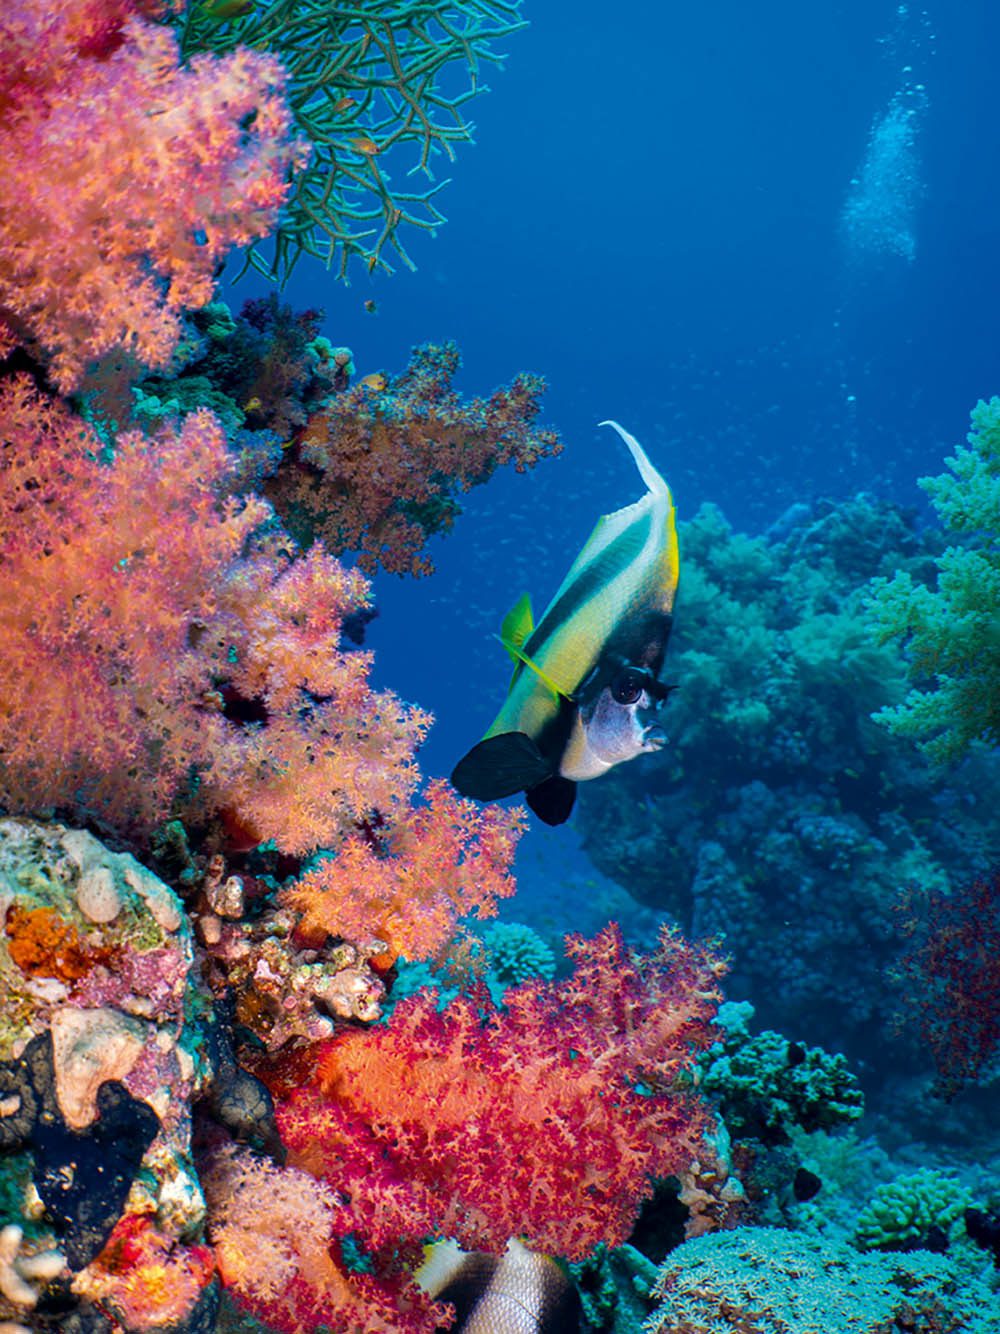 Bannerfish among the soft corals.